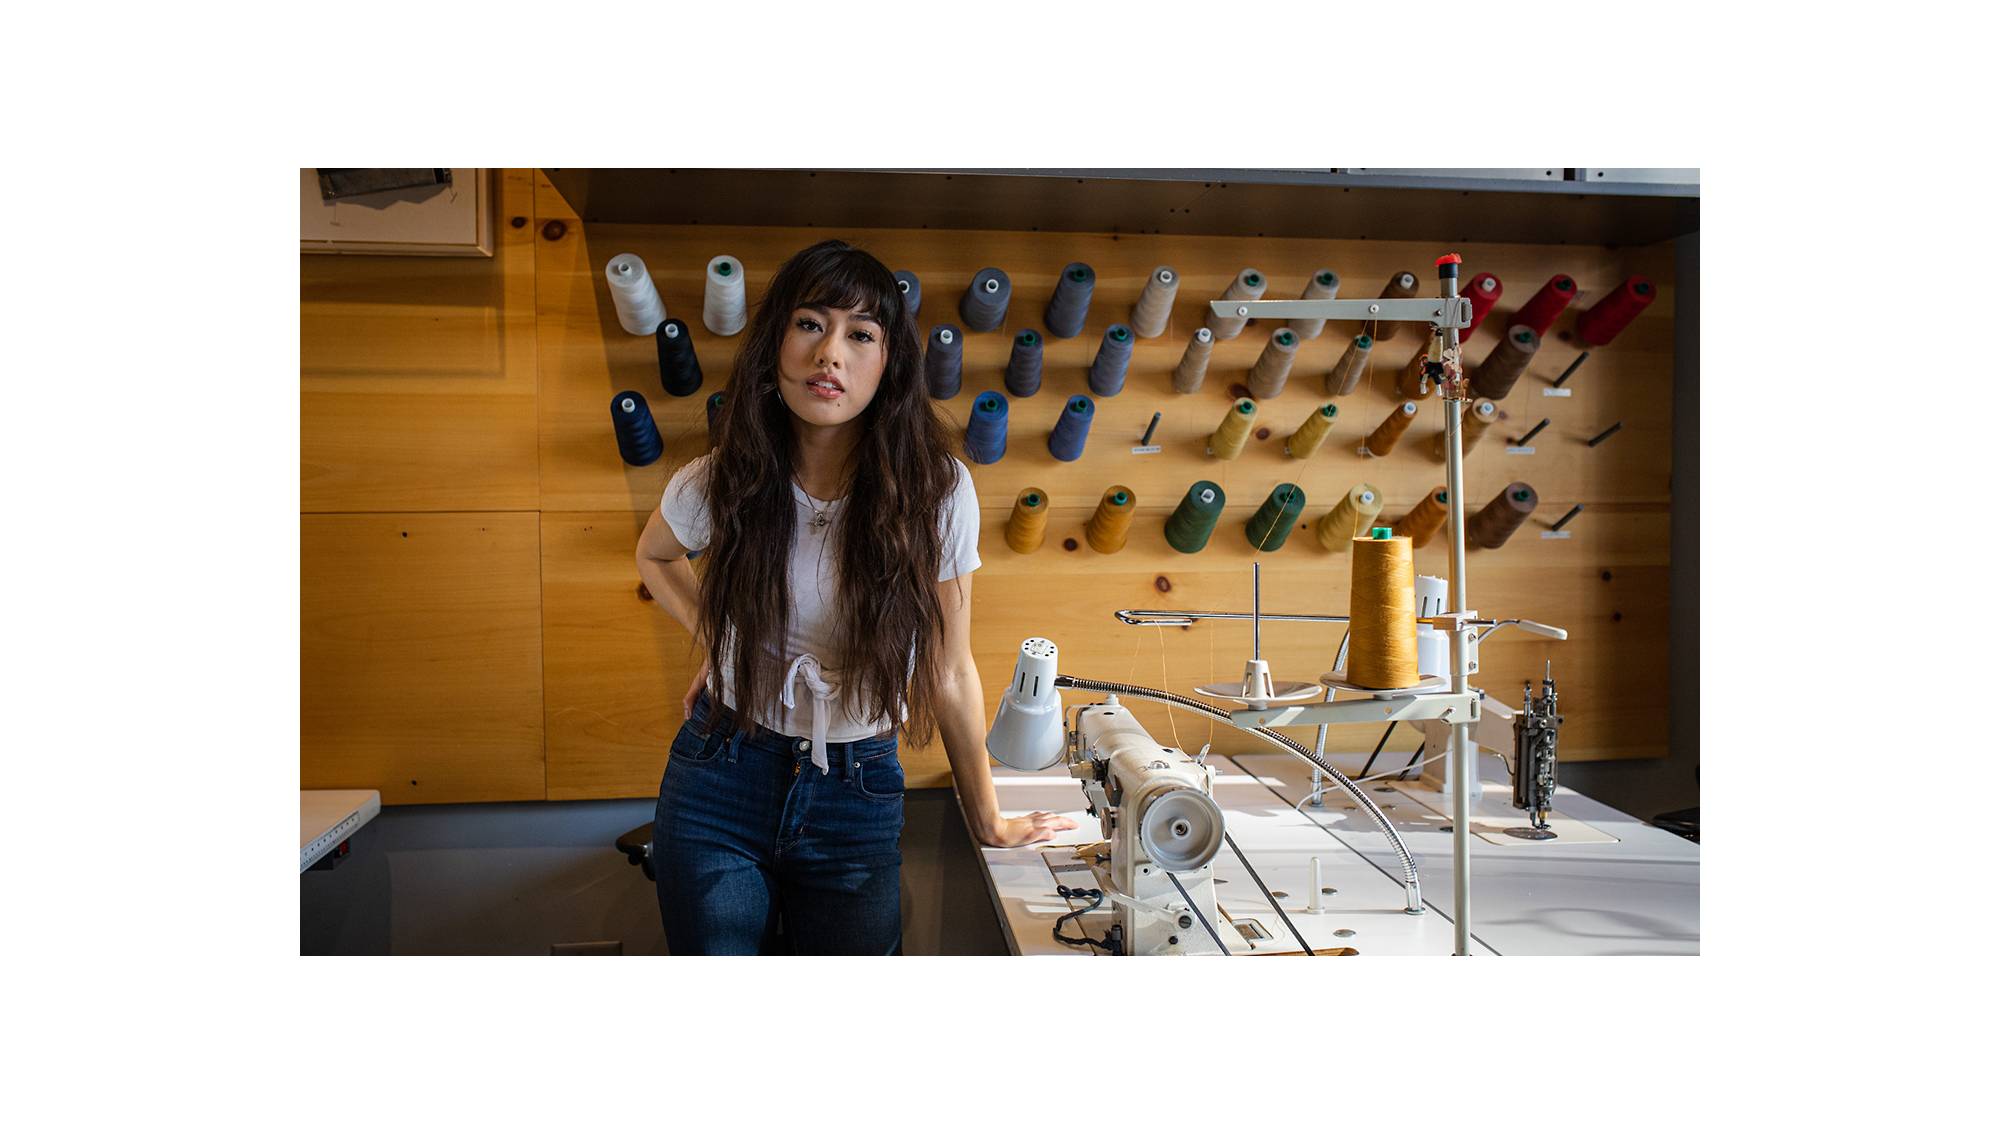 Bria Cheng leaning on a Tailor Shop table.